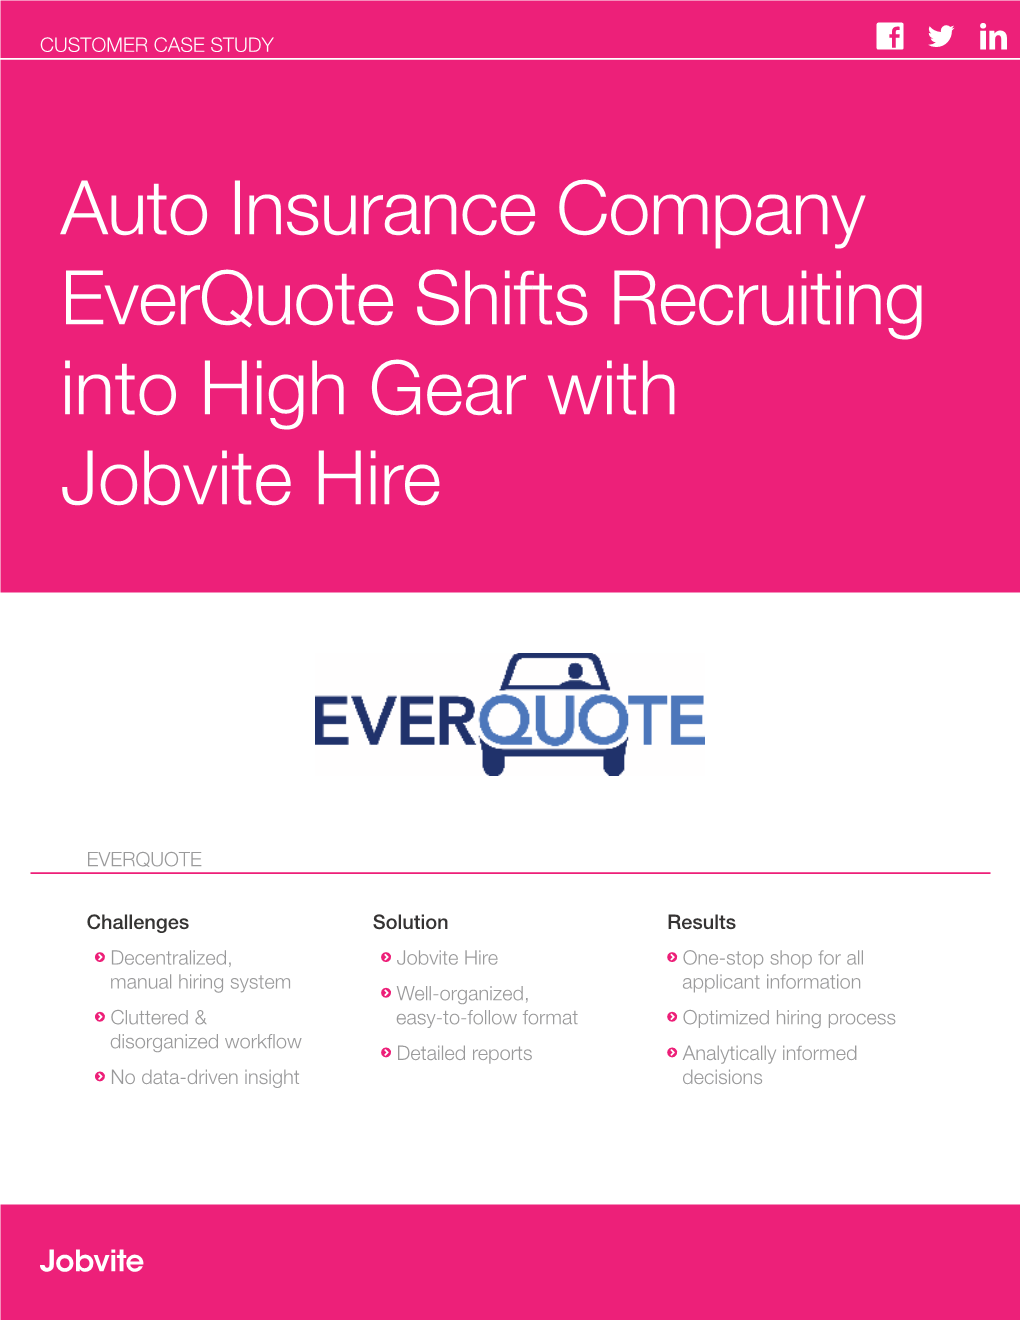 Auto Insurance Company Everquote Shifts Recruiting Into High Gear with Jobvite Hire